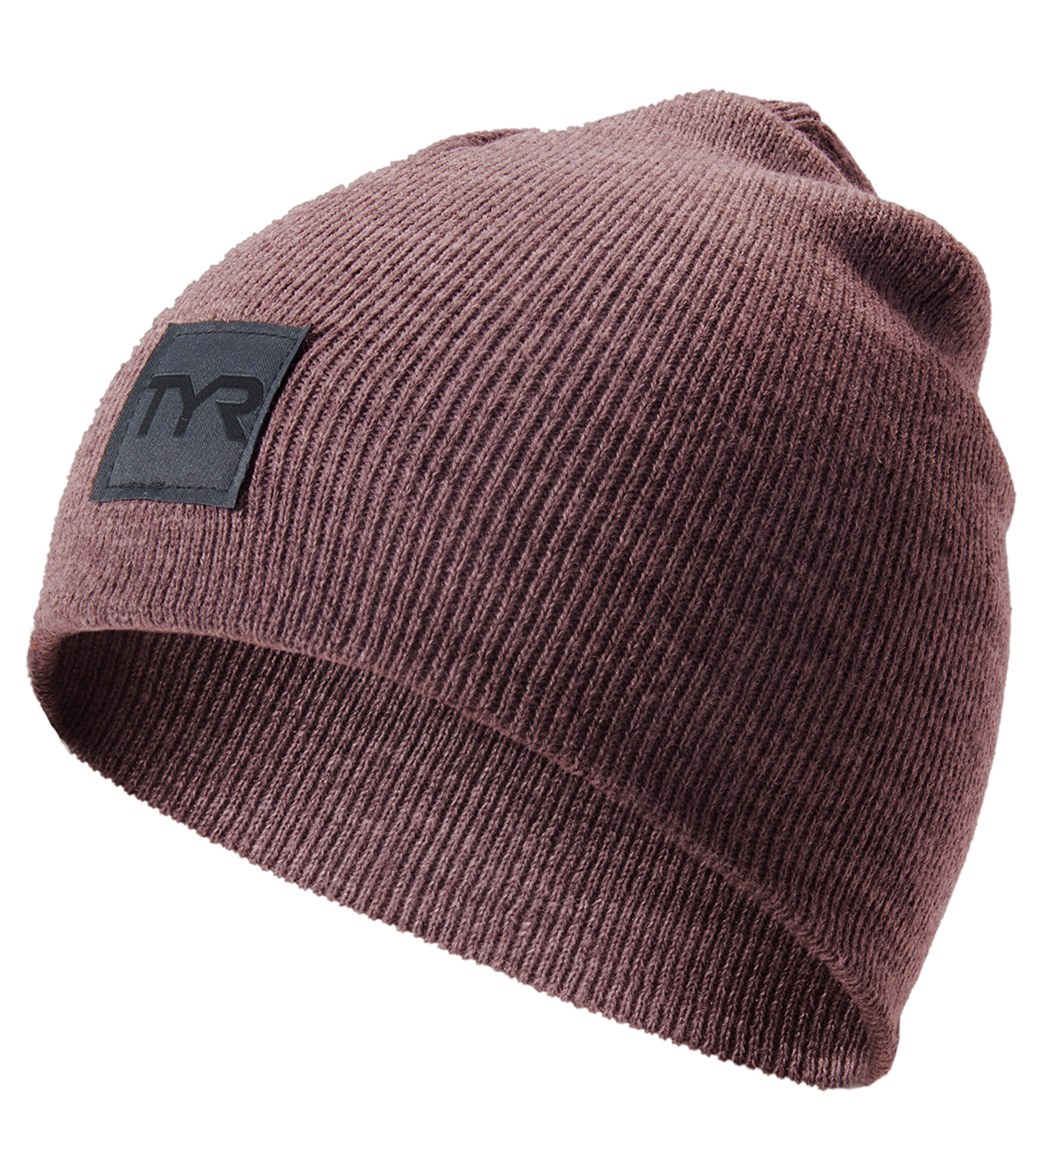 TYR Knit Beanie - Light Pink One Size - Swimoutlet.com